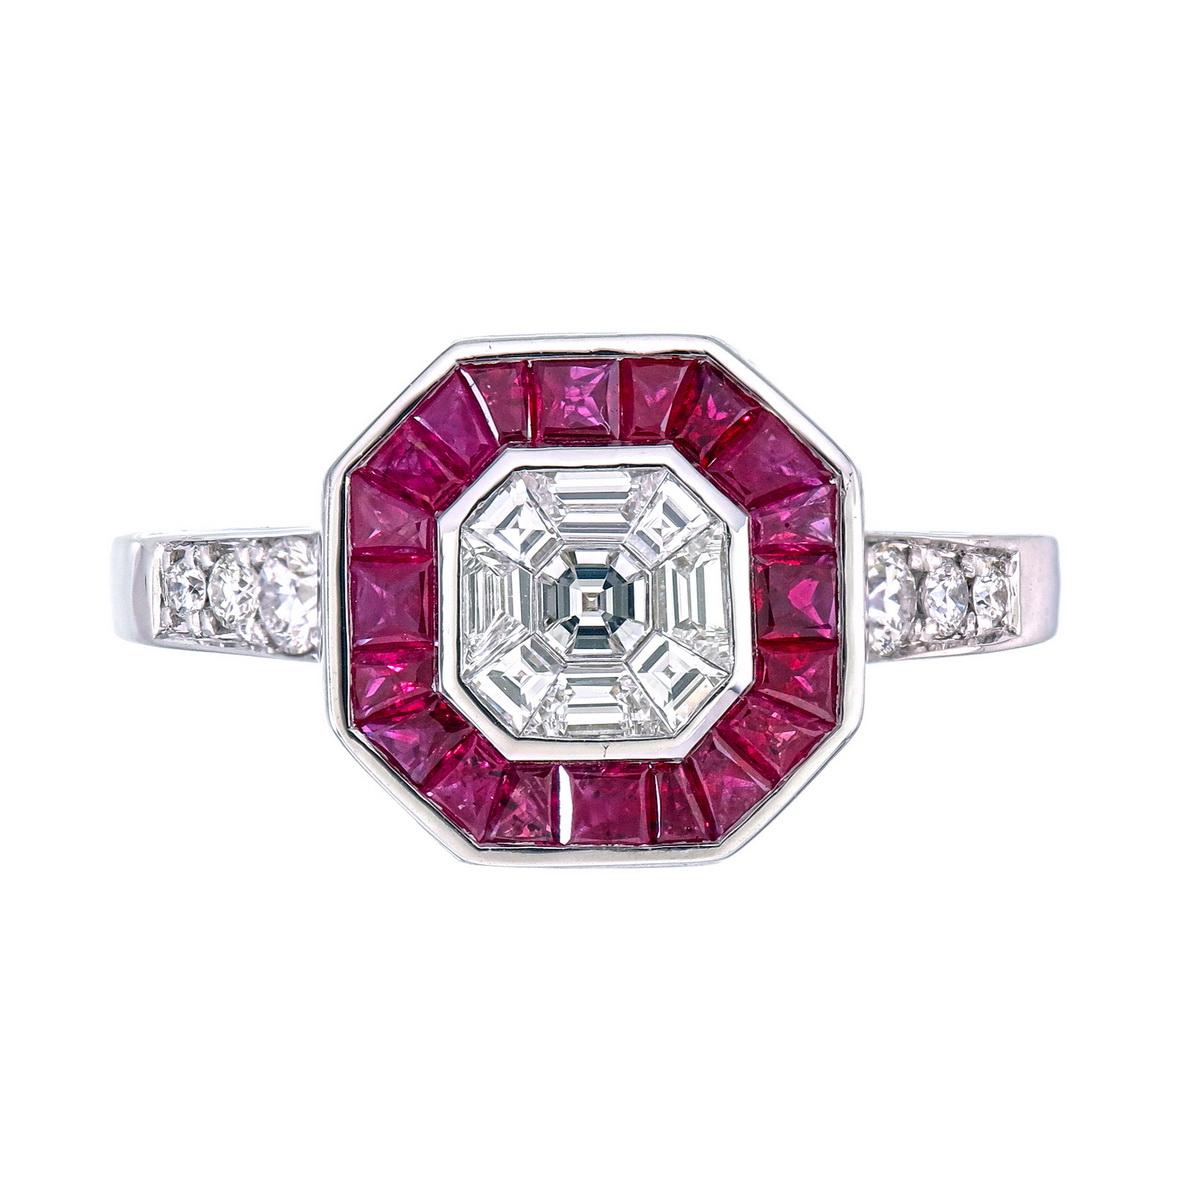 A classic yet extraordinary ring made in 18kt Gold with Asscher illusion diamond surrounded by Ruby.

Each ruby is cut, polished & invisible set  to match one color without any visible gaps in between them

VVS clarity EF color diamonds are used in